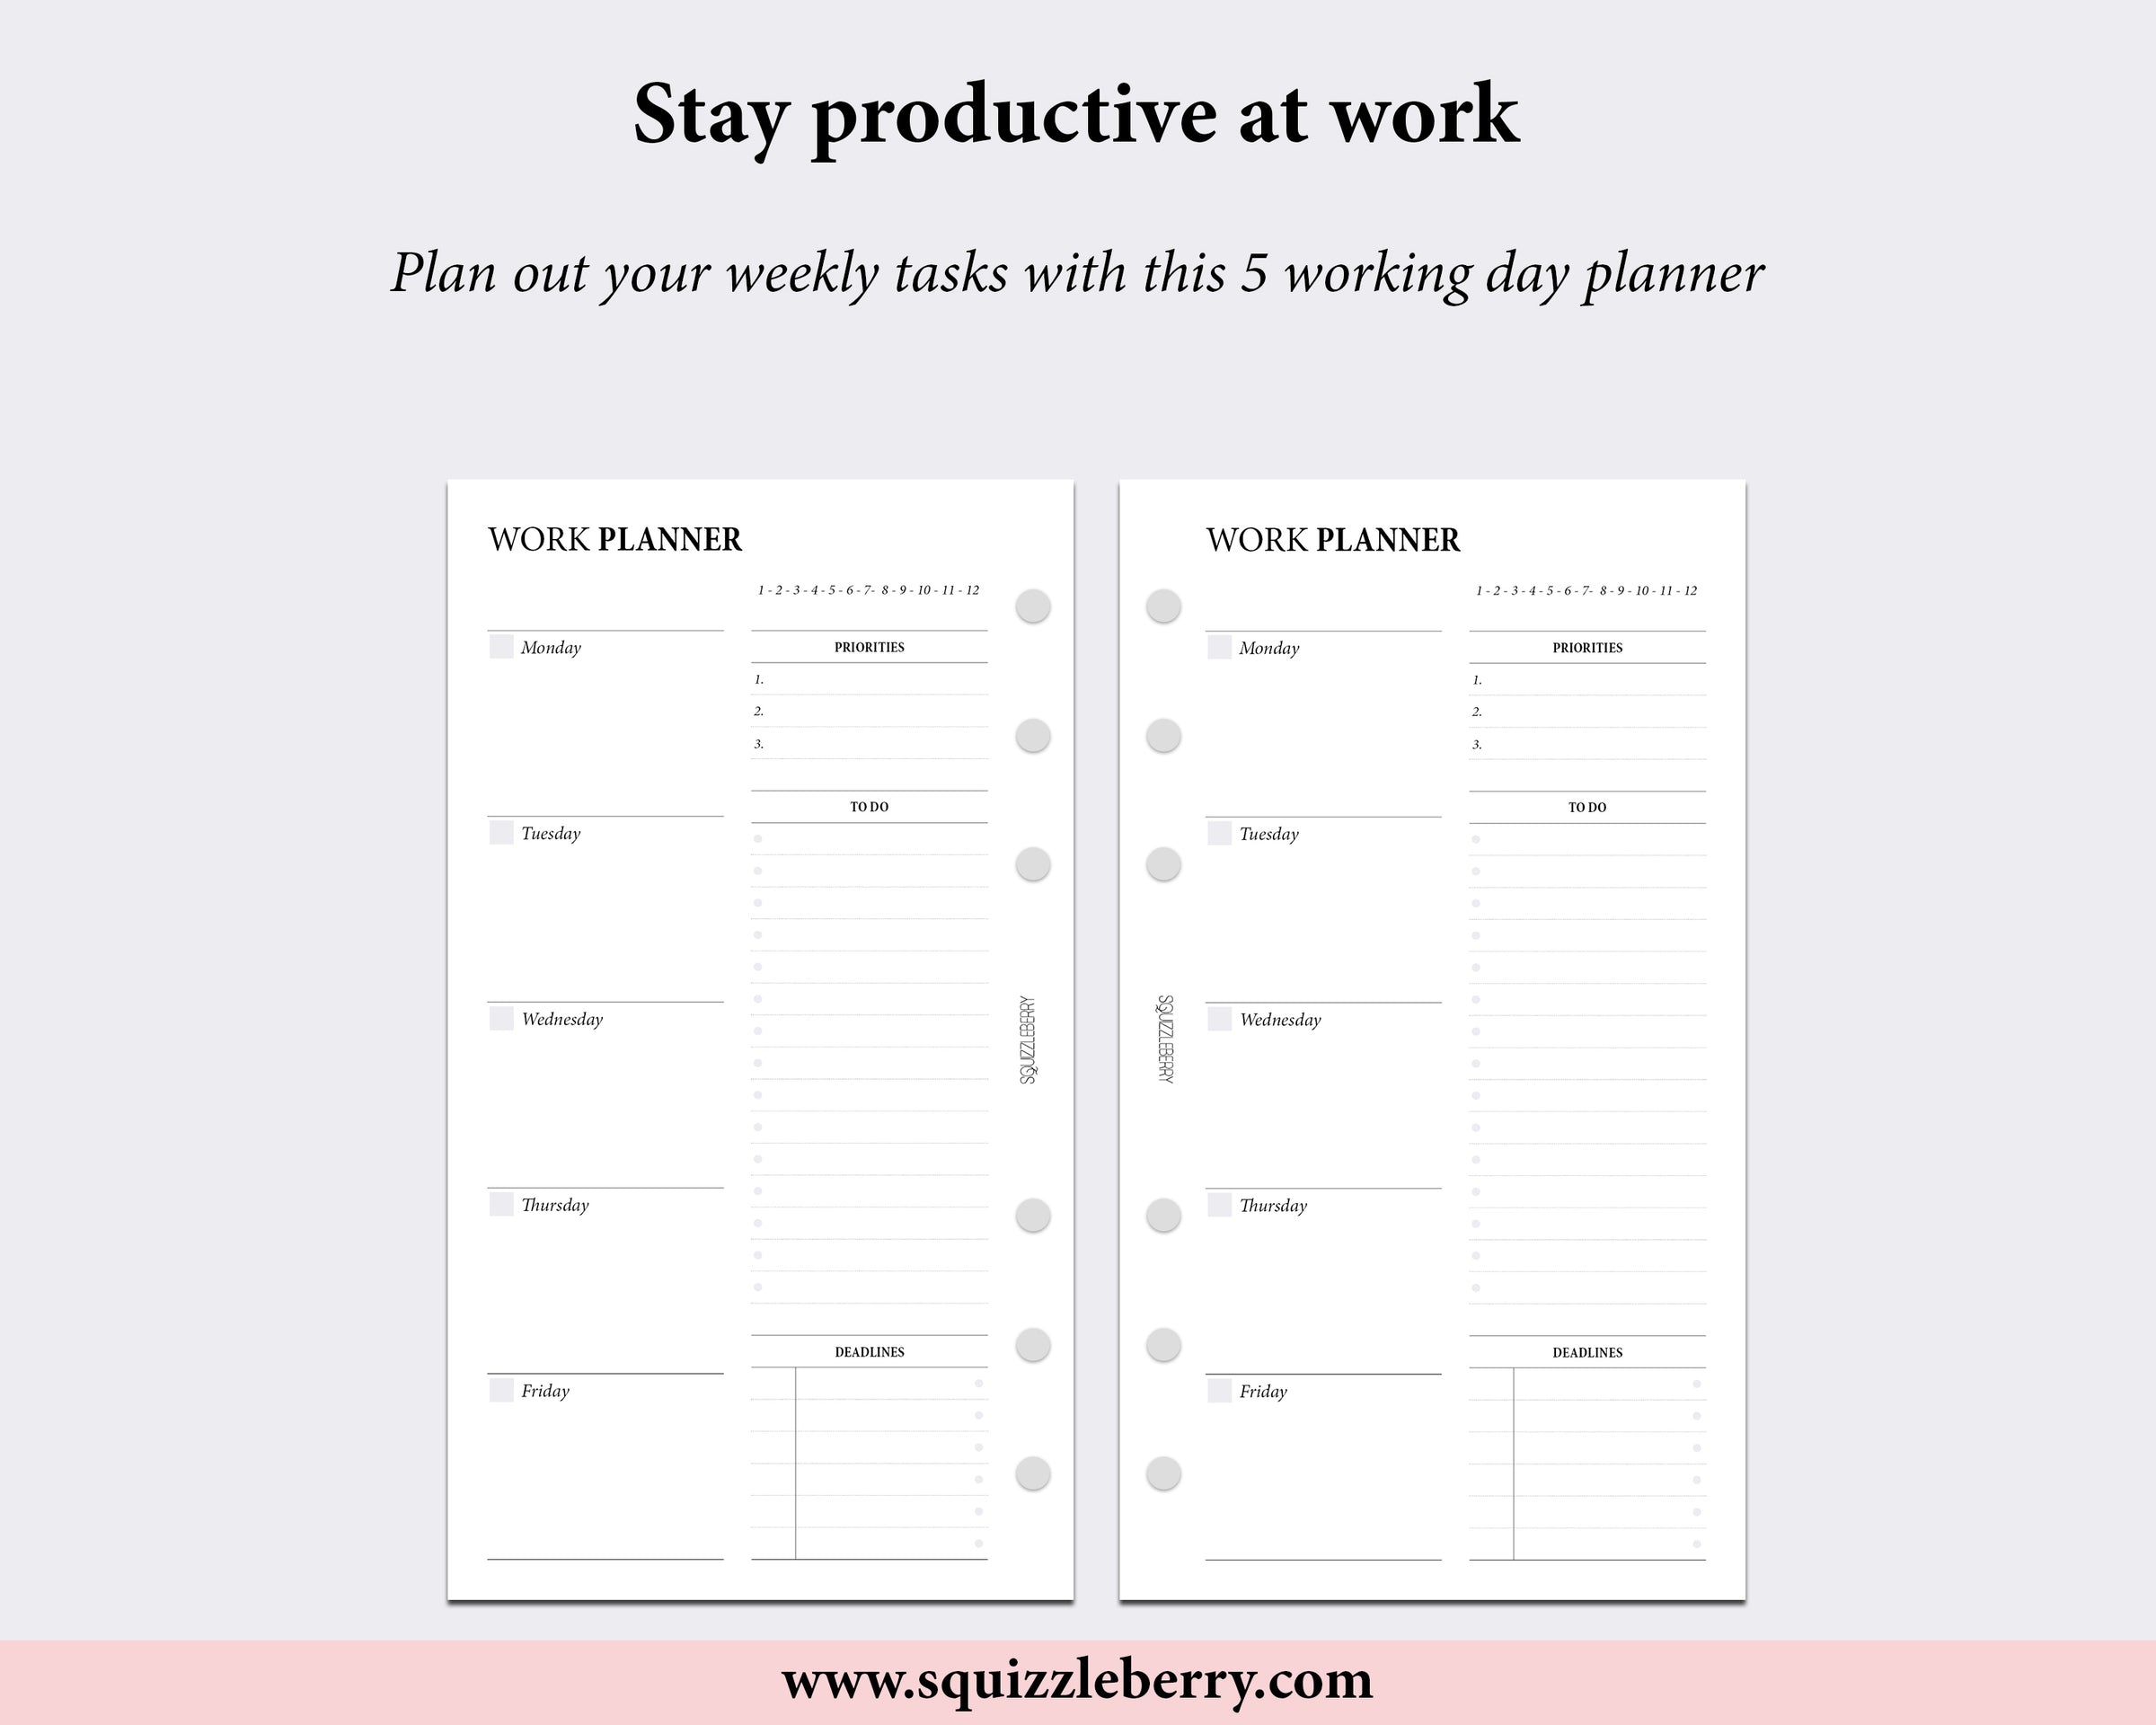 Work Planner - Personal | SquizzleBerry